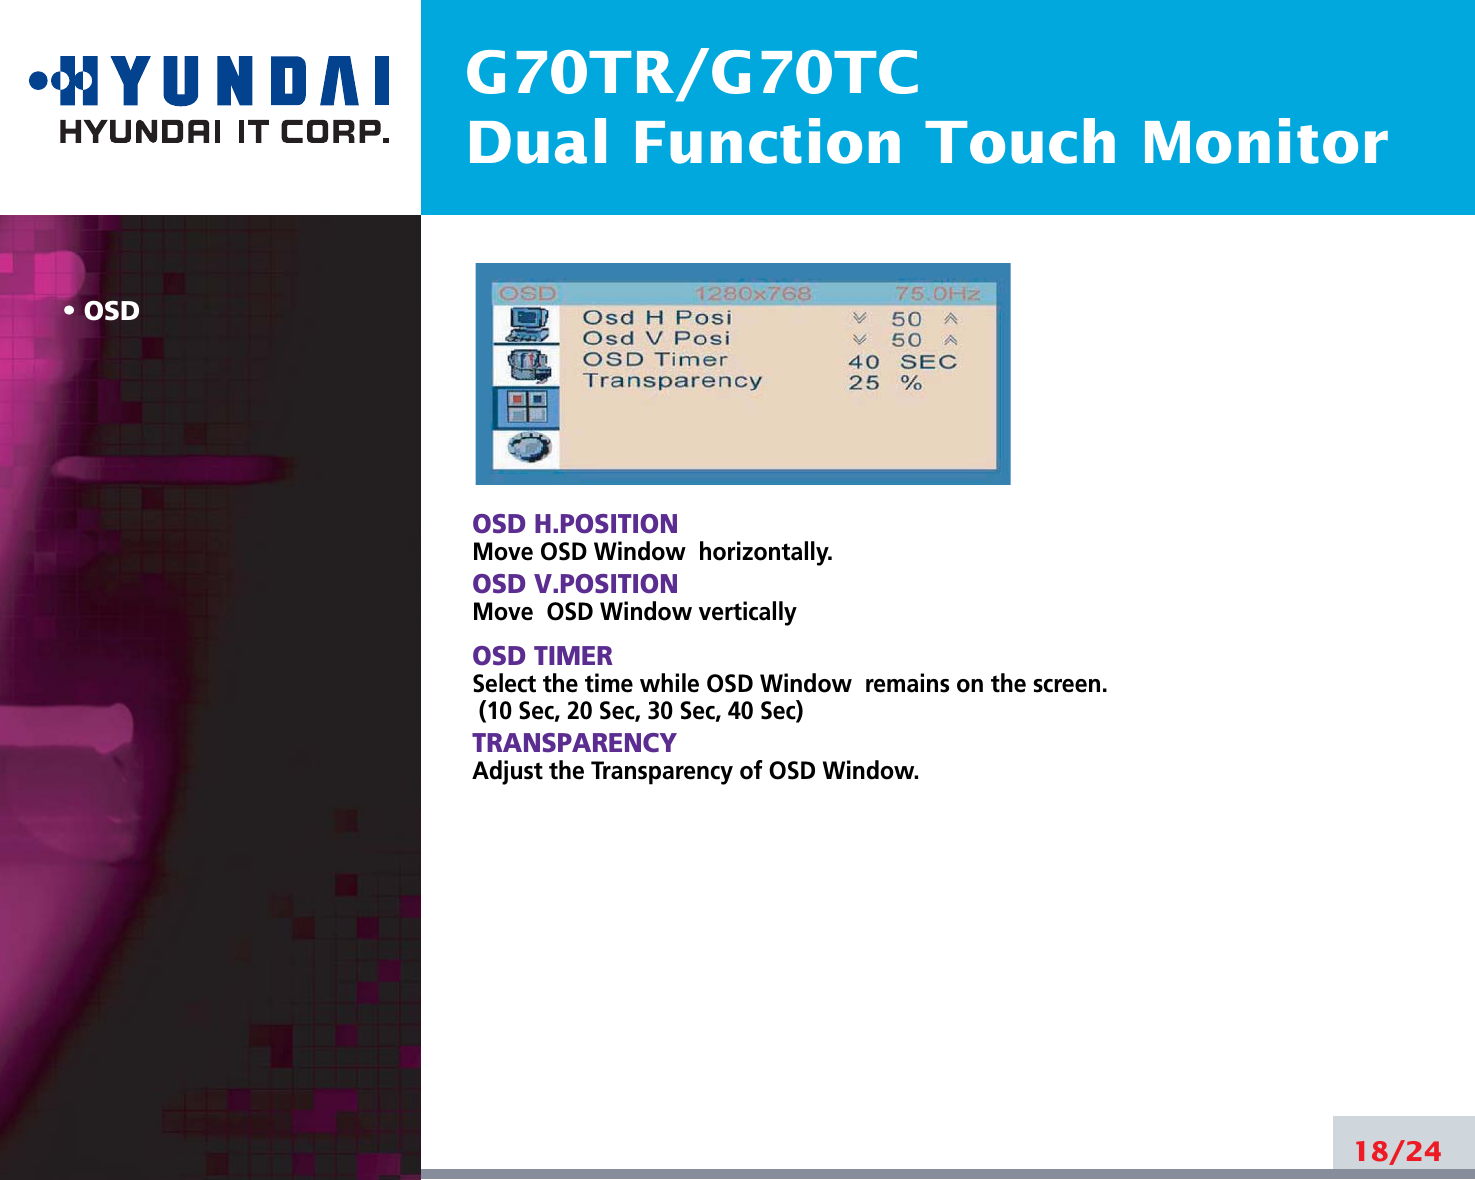 G70TR/G70TCDual Function Touch MonitorOSD18/24OSD H.POSITIONMove OSD Window  horizontally.OSD V.POSITIONMove  OSD Window verticallyOSD TIMERSelect the time while OSD Window  remains on the screen.(10 Sec, 20 Sec, 30 Sec, 40 Sec)TRANSPARENCYAdjust the Transparency of OSD Window.